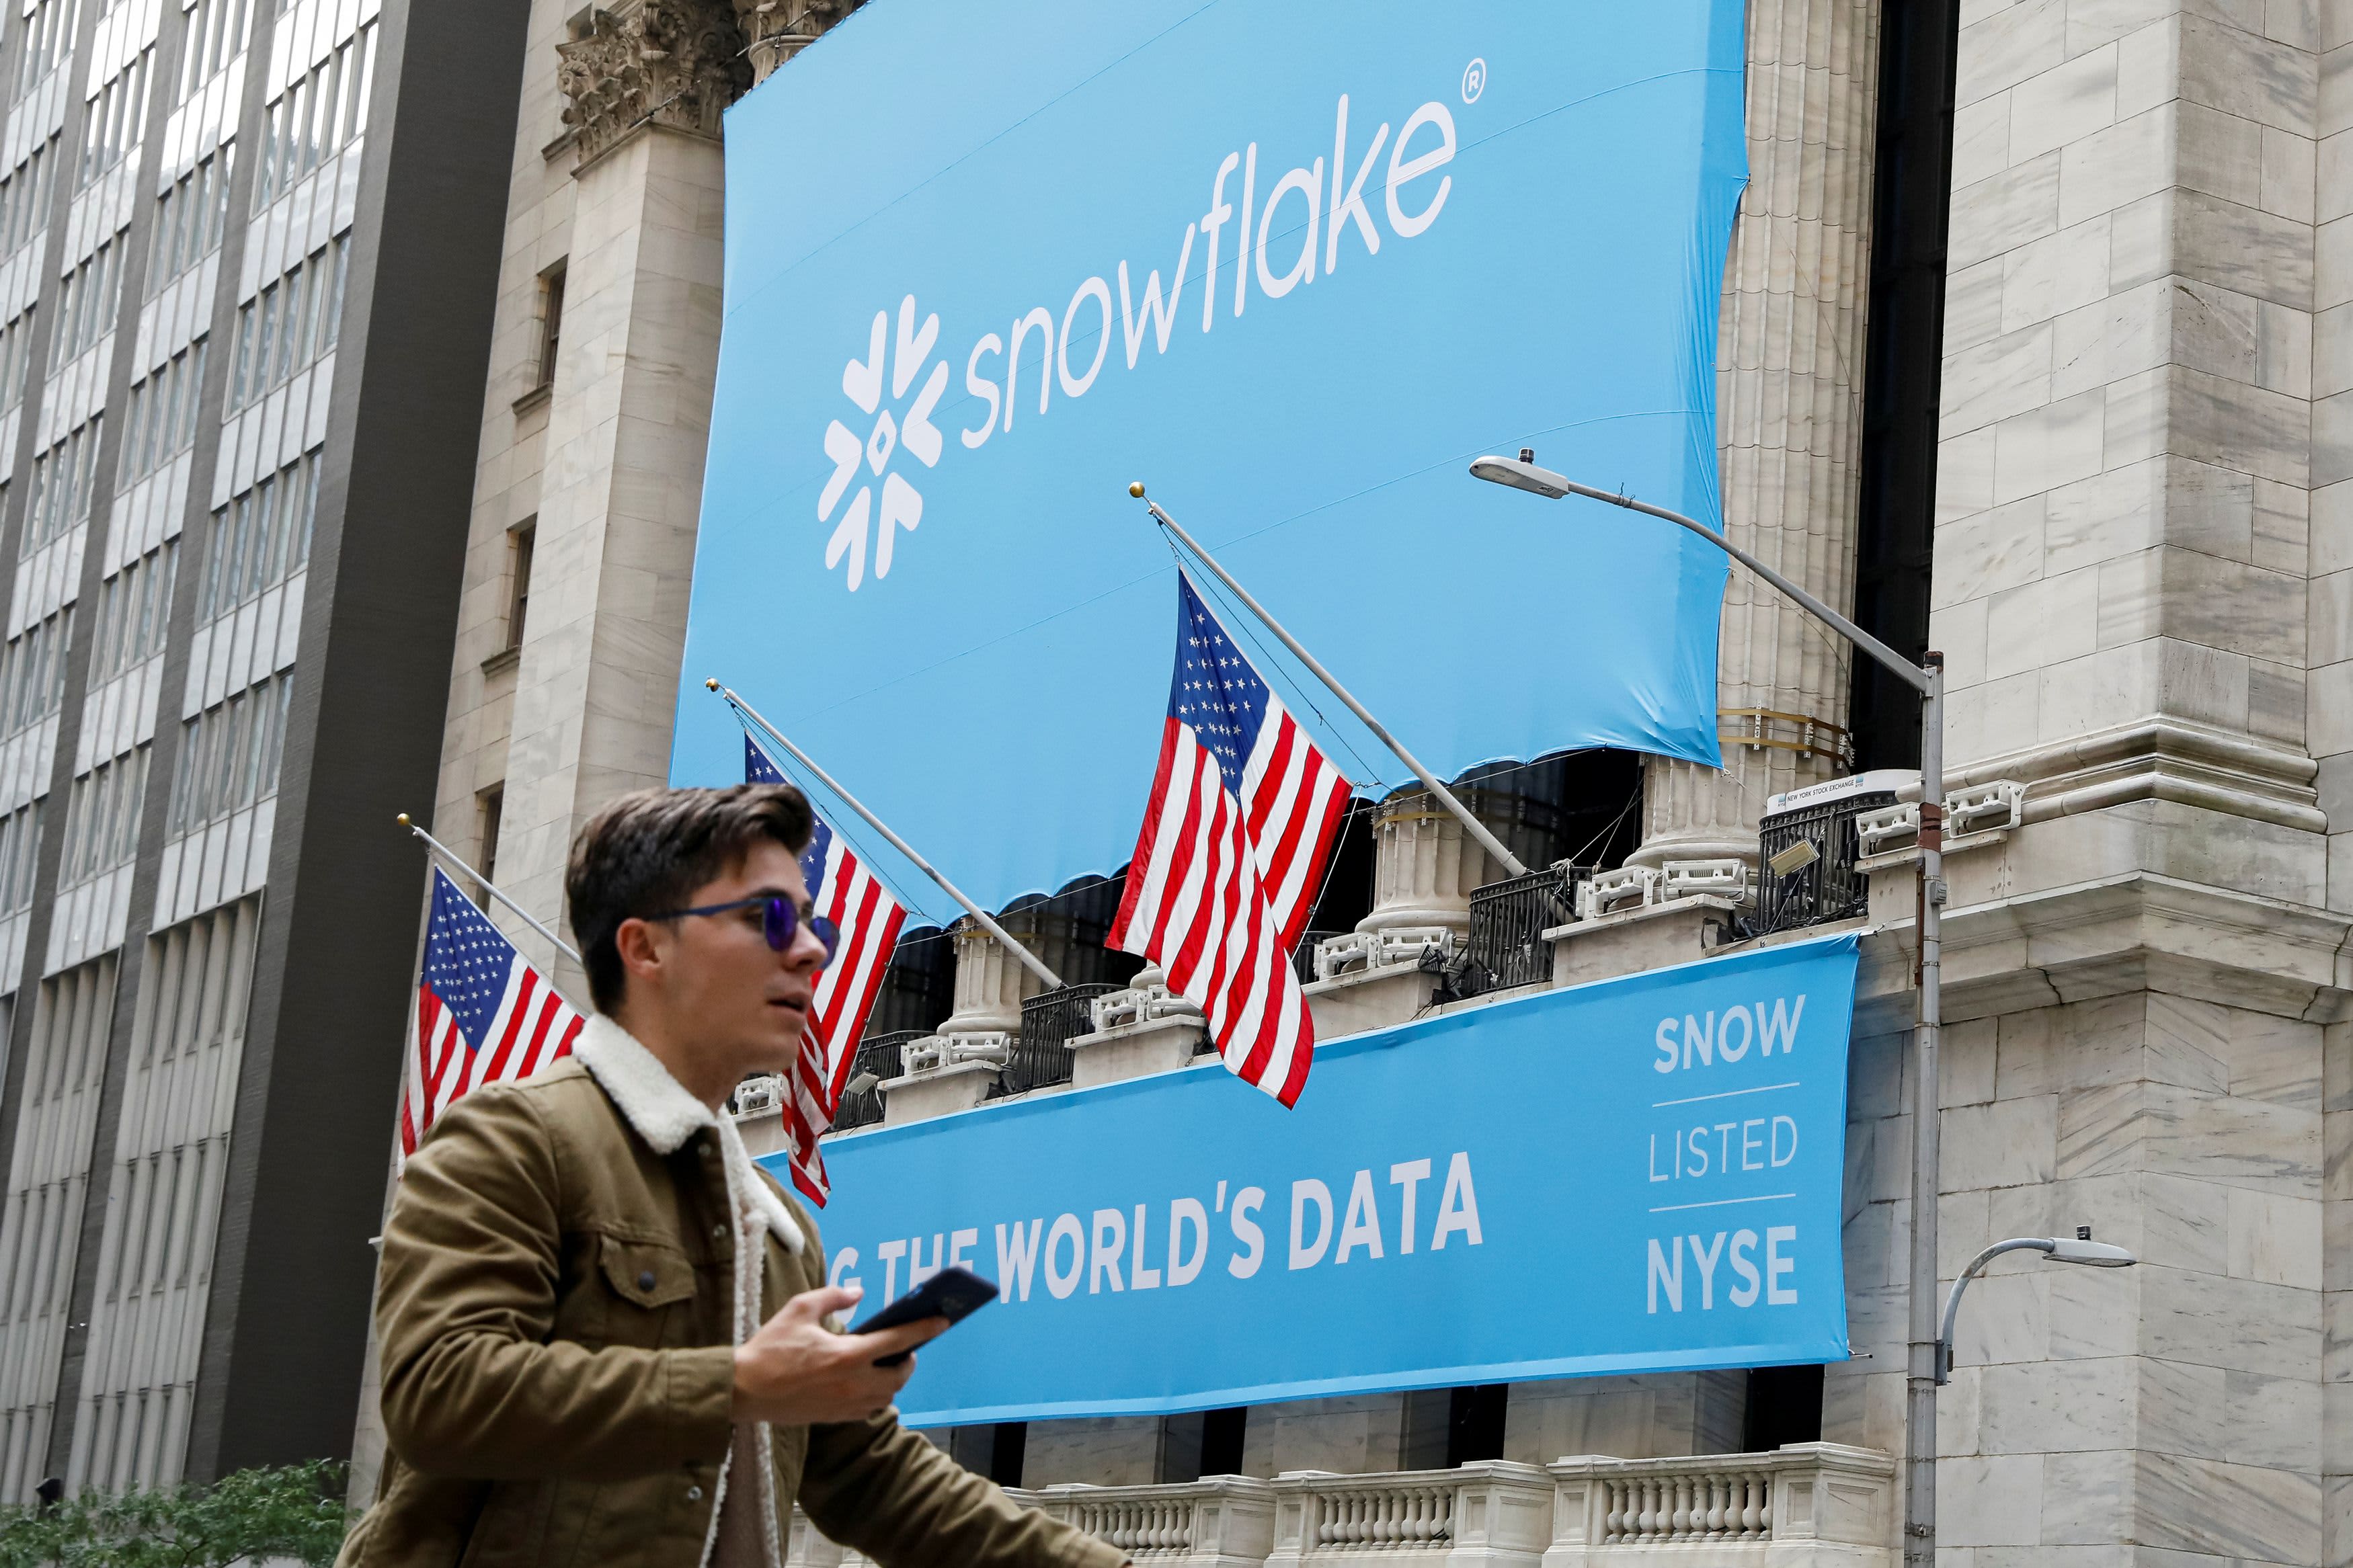 Snowflake shares tumble 14% after it reports slowing revenue growth